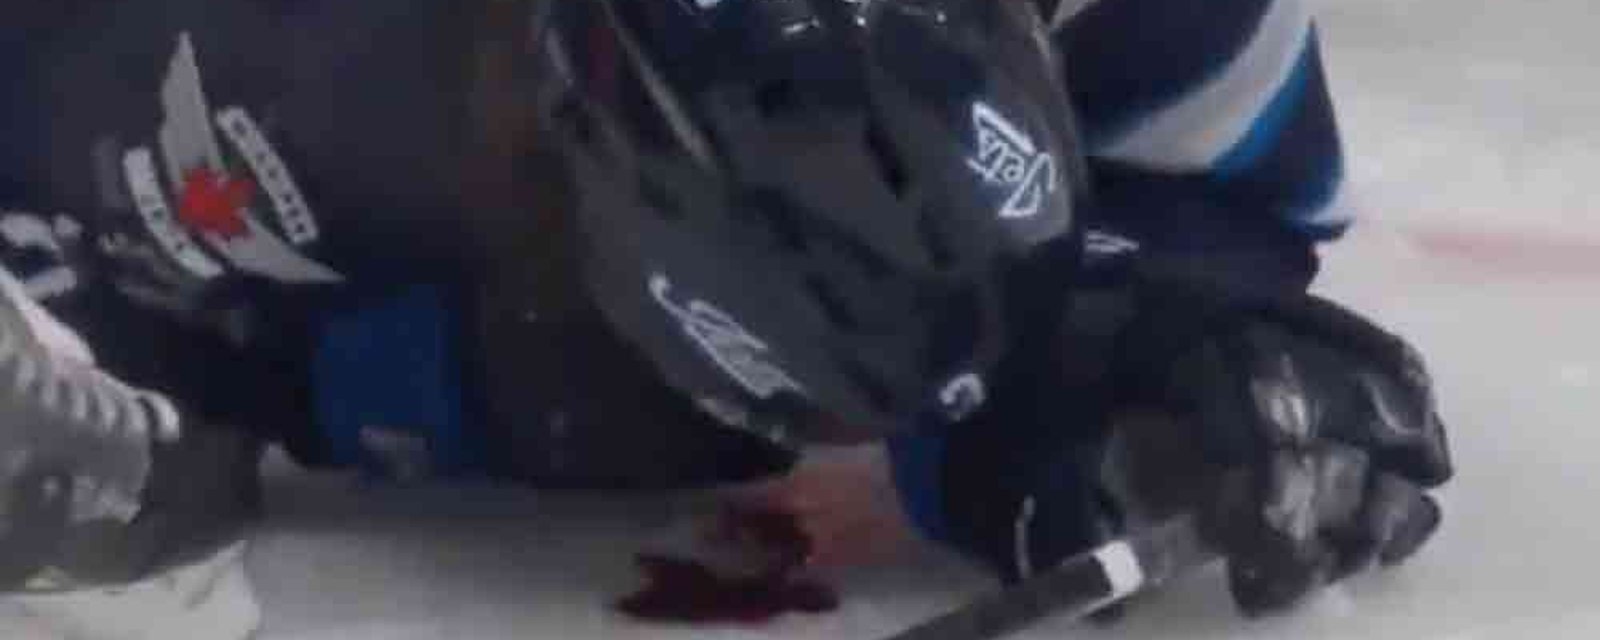 Jets’ Poolman dives face first to block shot, leaves a bloody mess! 